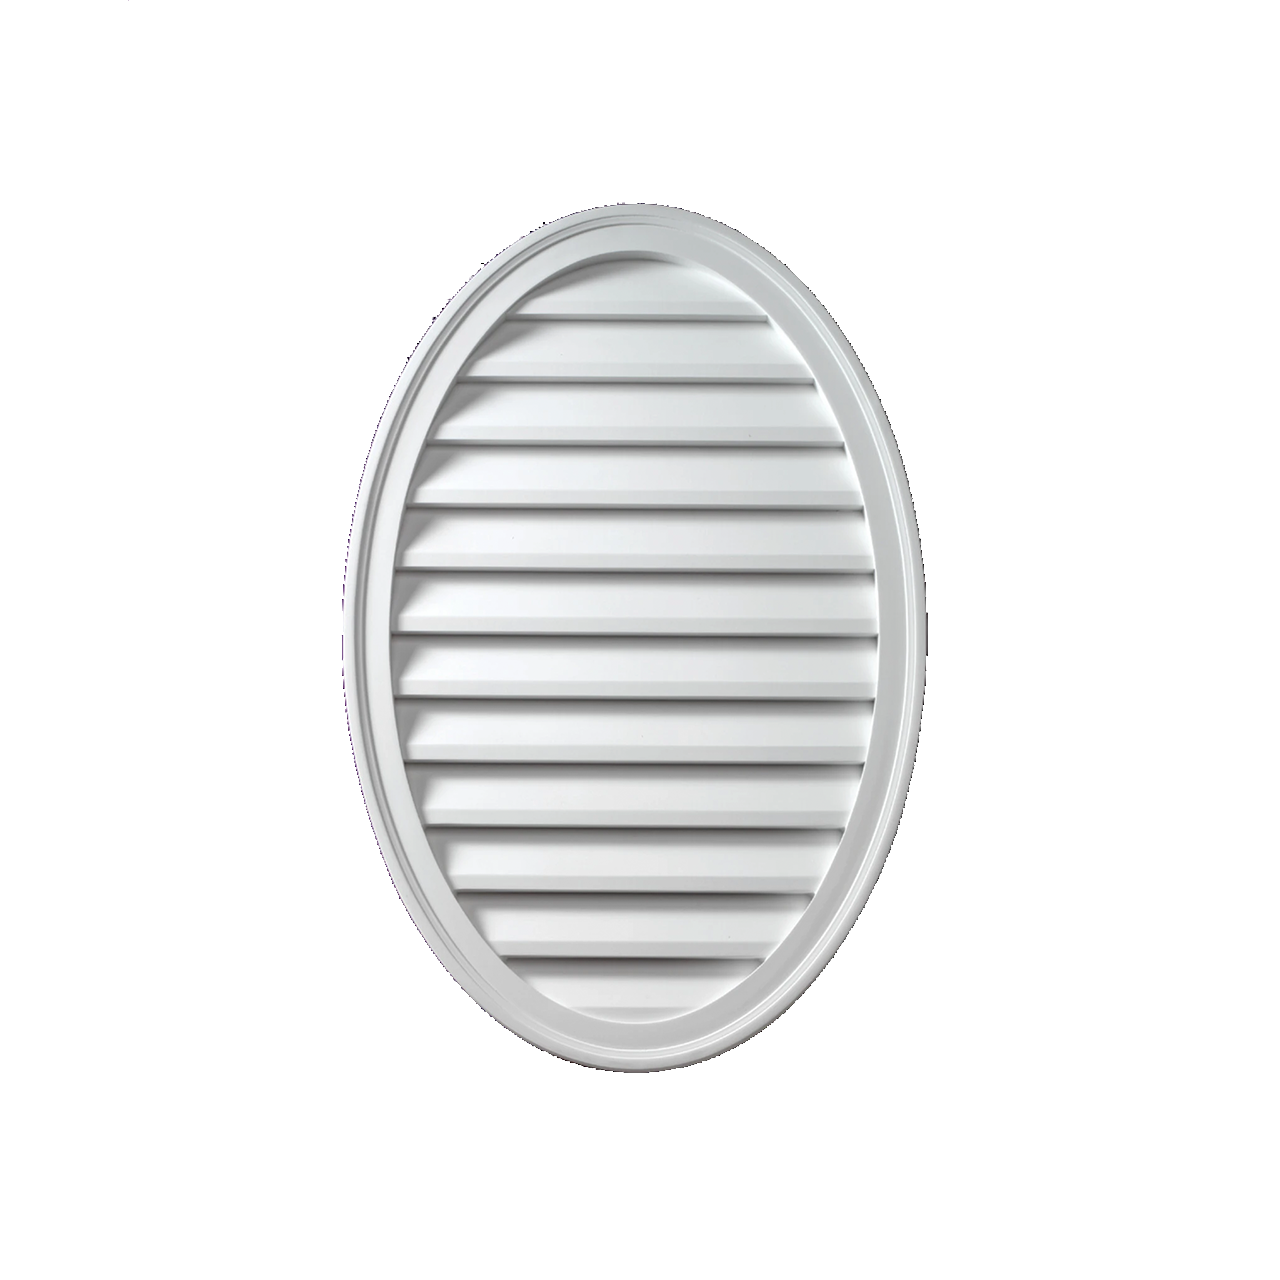 FOVLV18X24V Functional Vertical Oval Louver Vent with Screen